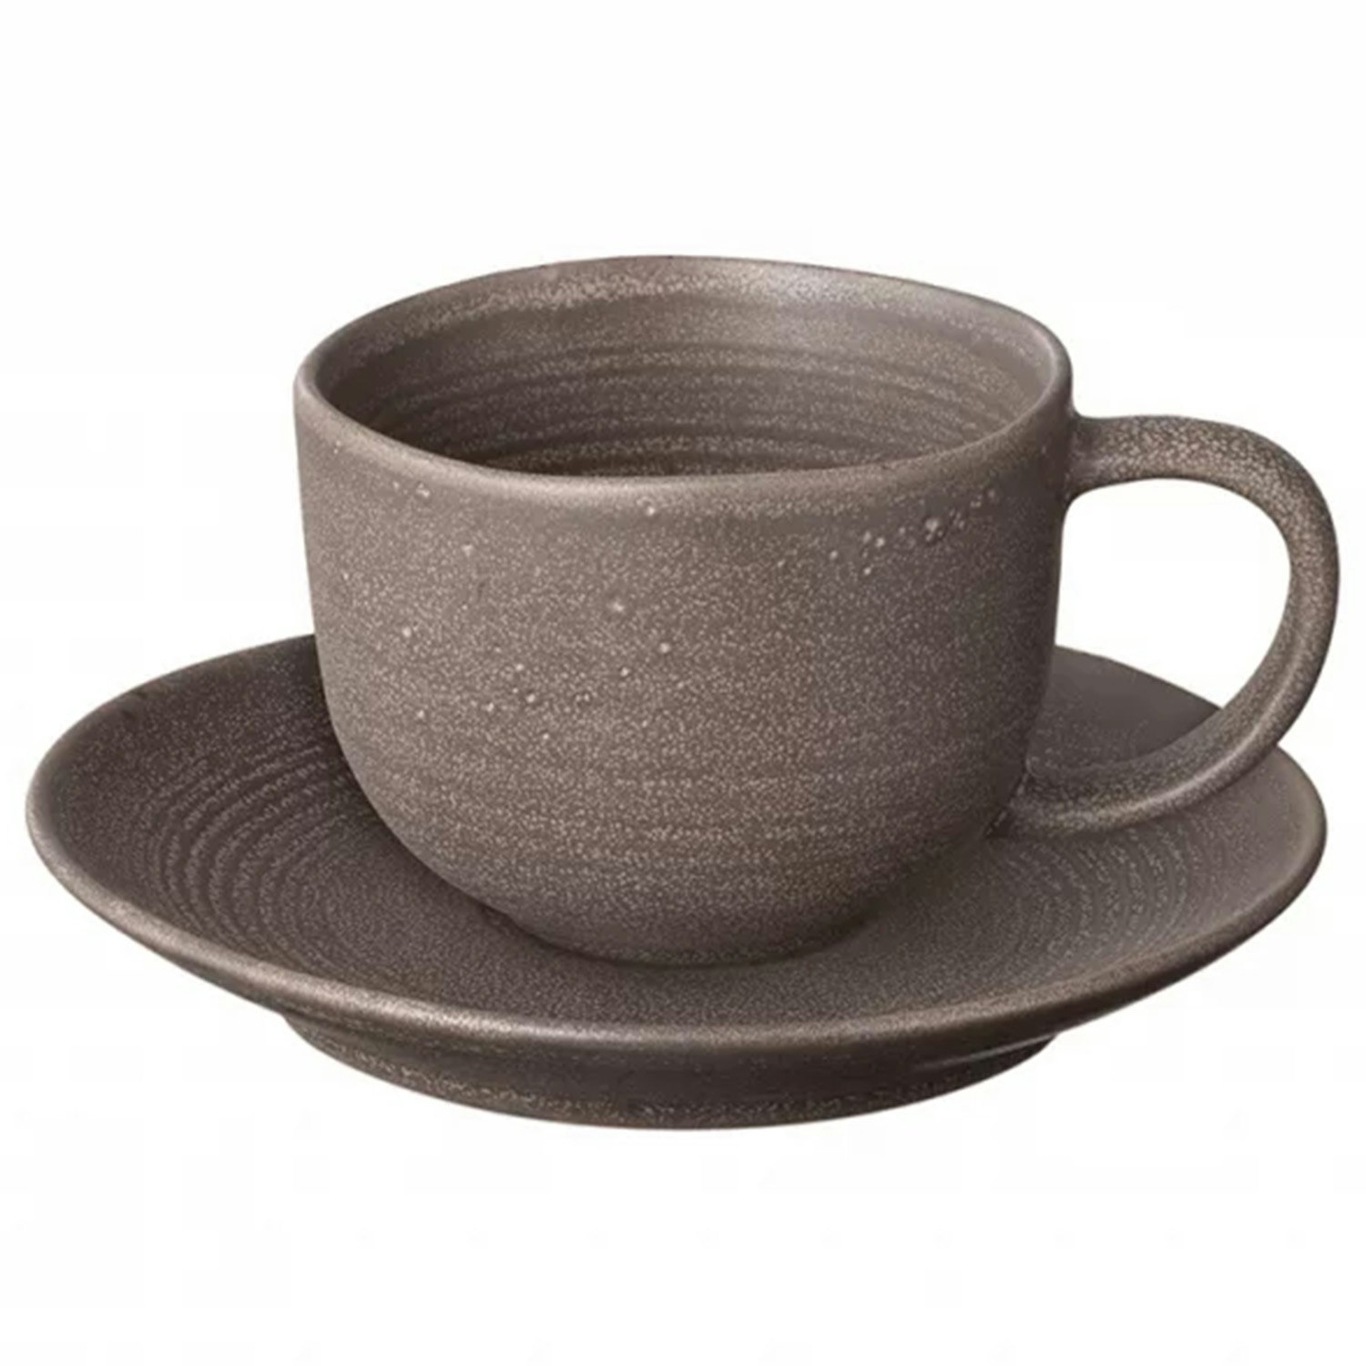 KUMI Coffee Cup With Saucer 2-pack, Espresso